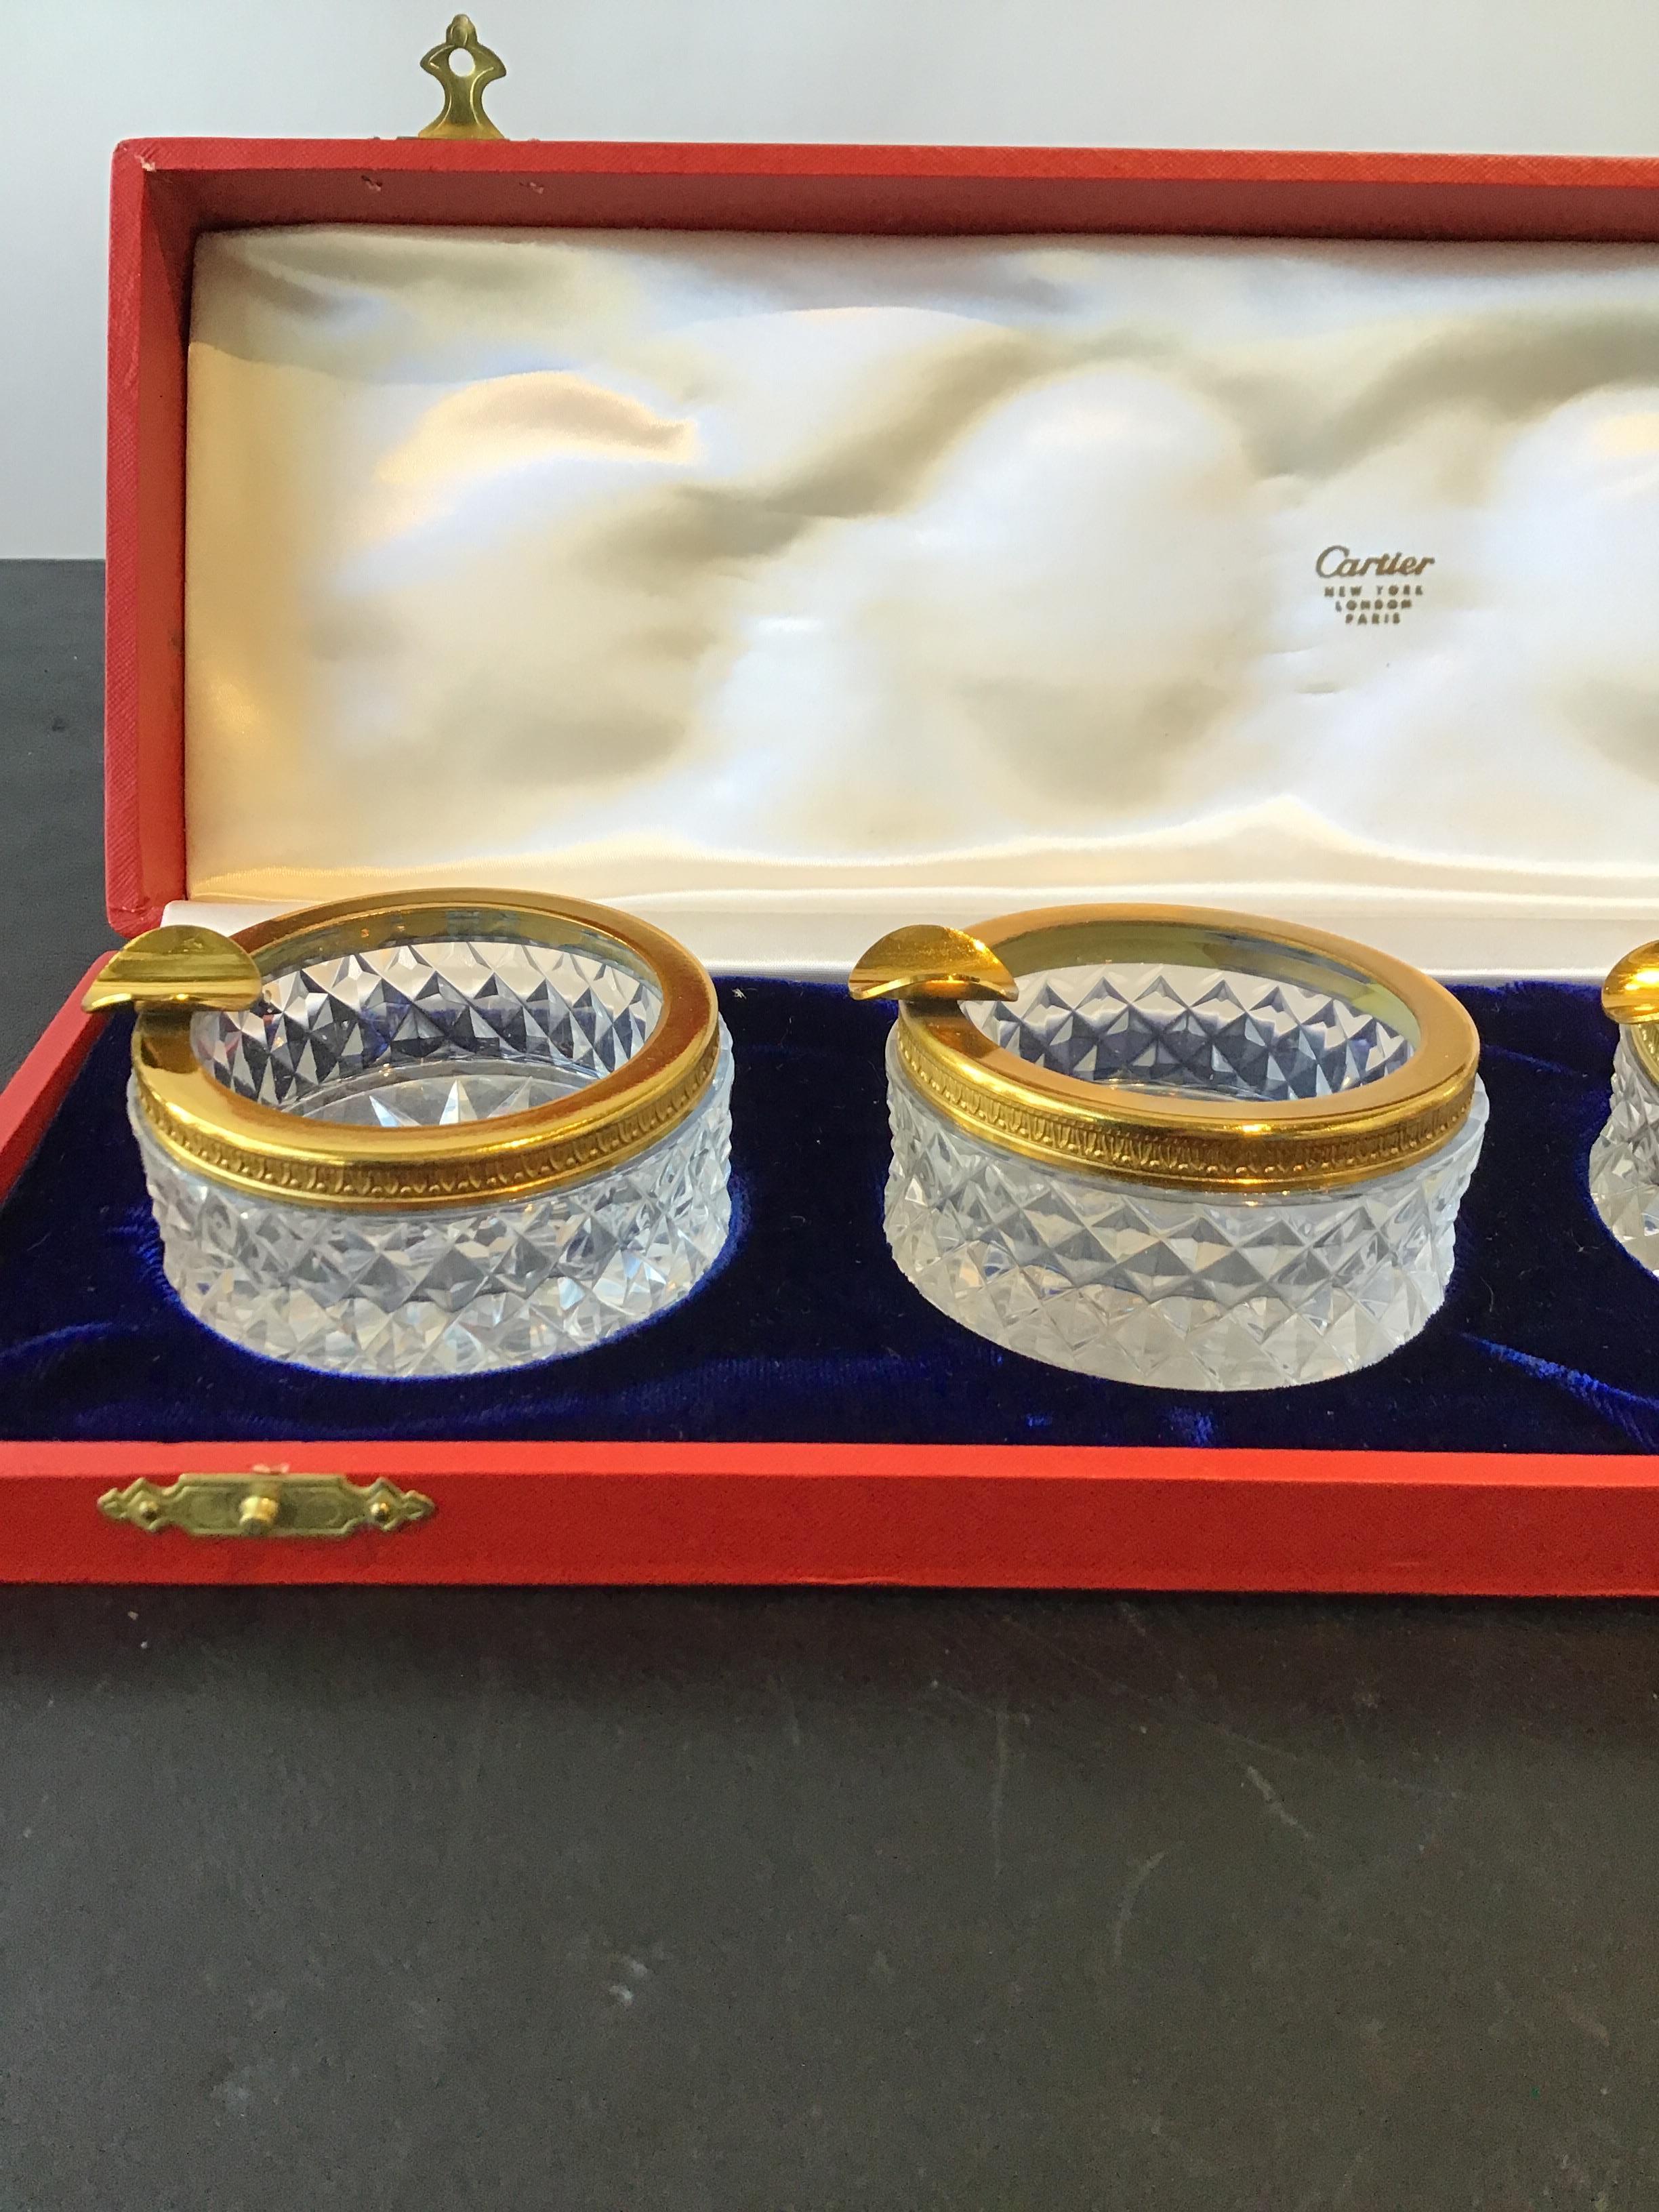 1970s Cartier crystal ashtray set with bass rim. Never used. Super chic.